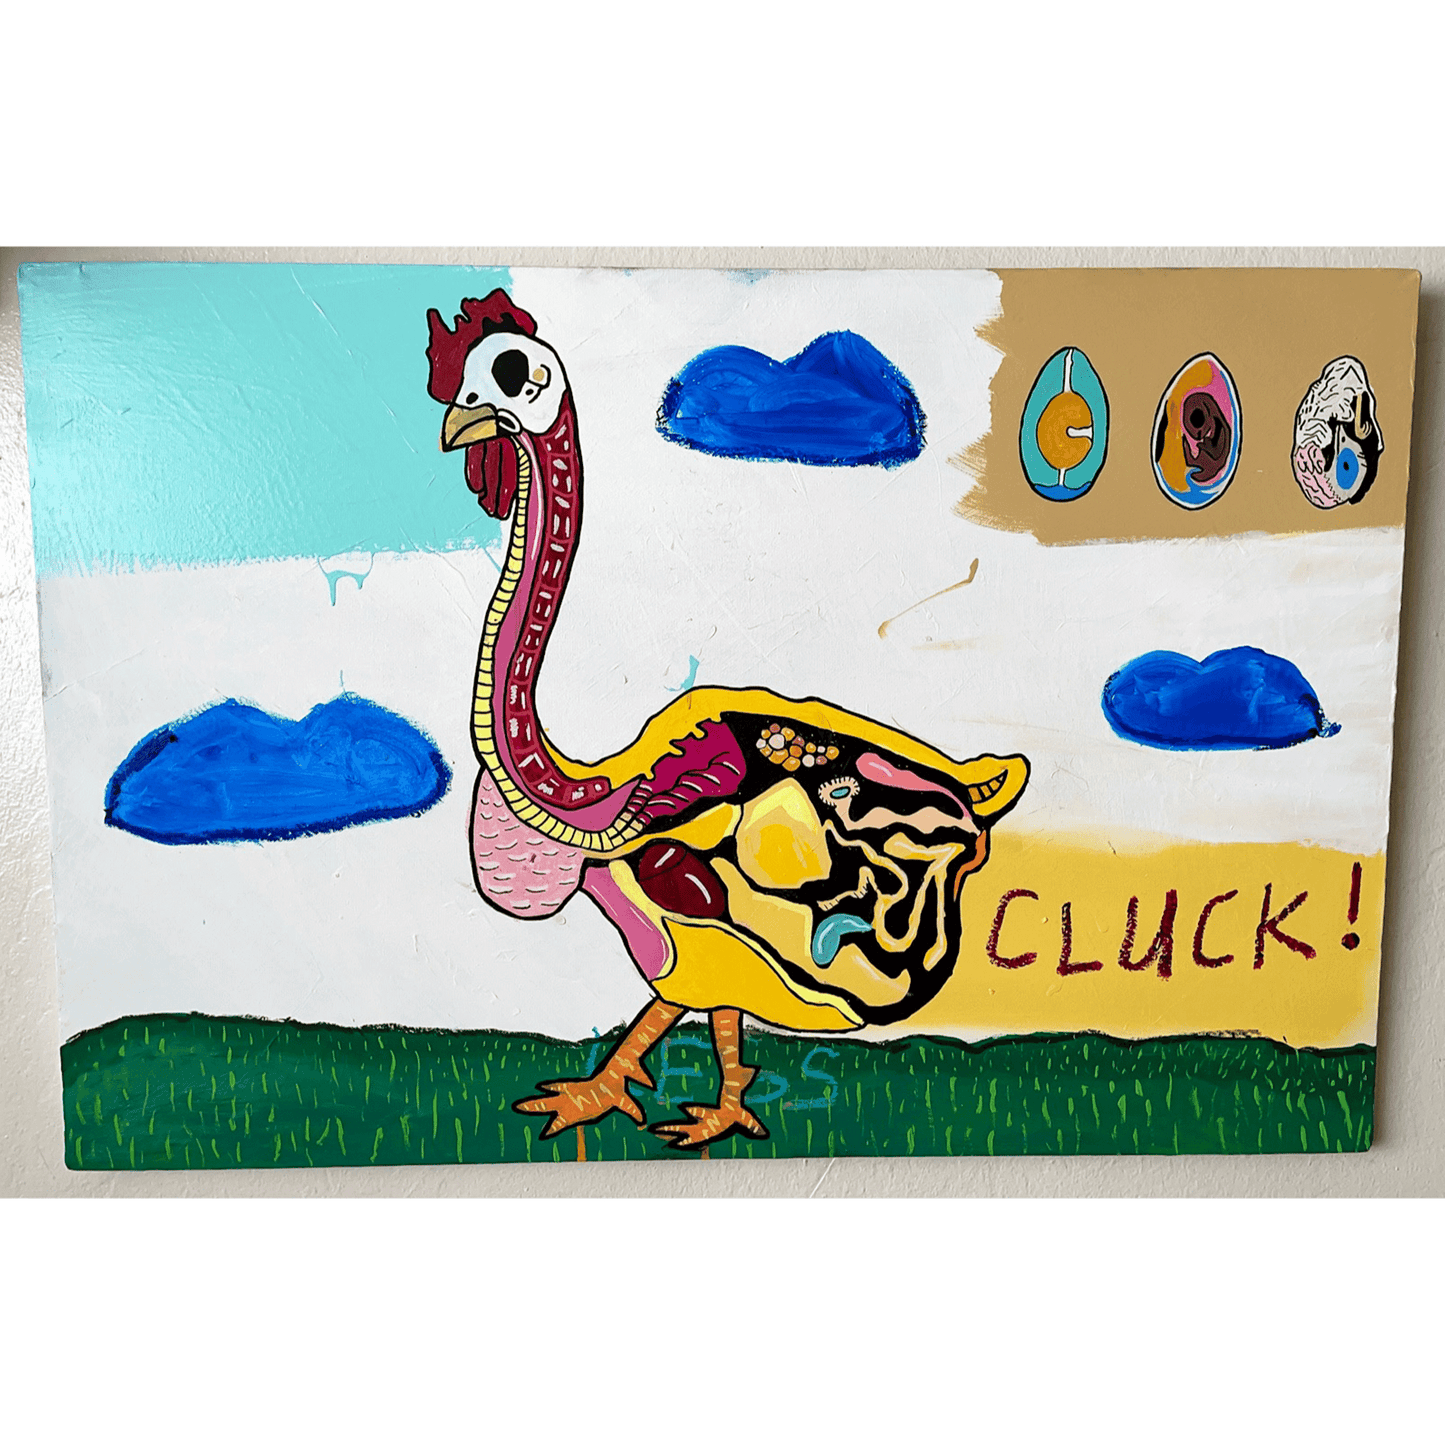 "Cluck!" - Painting